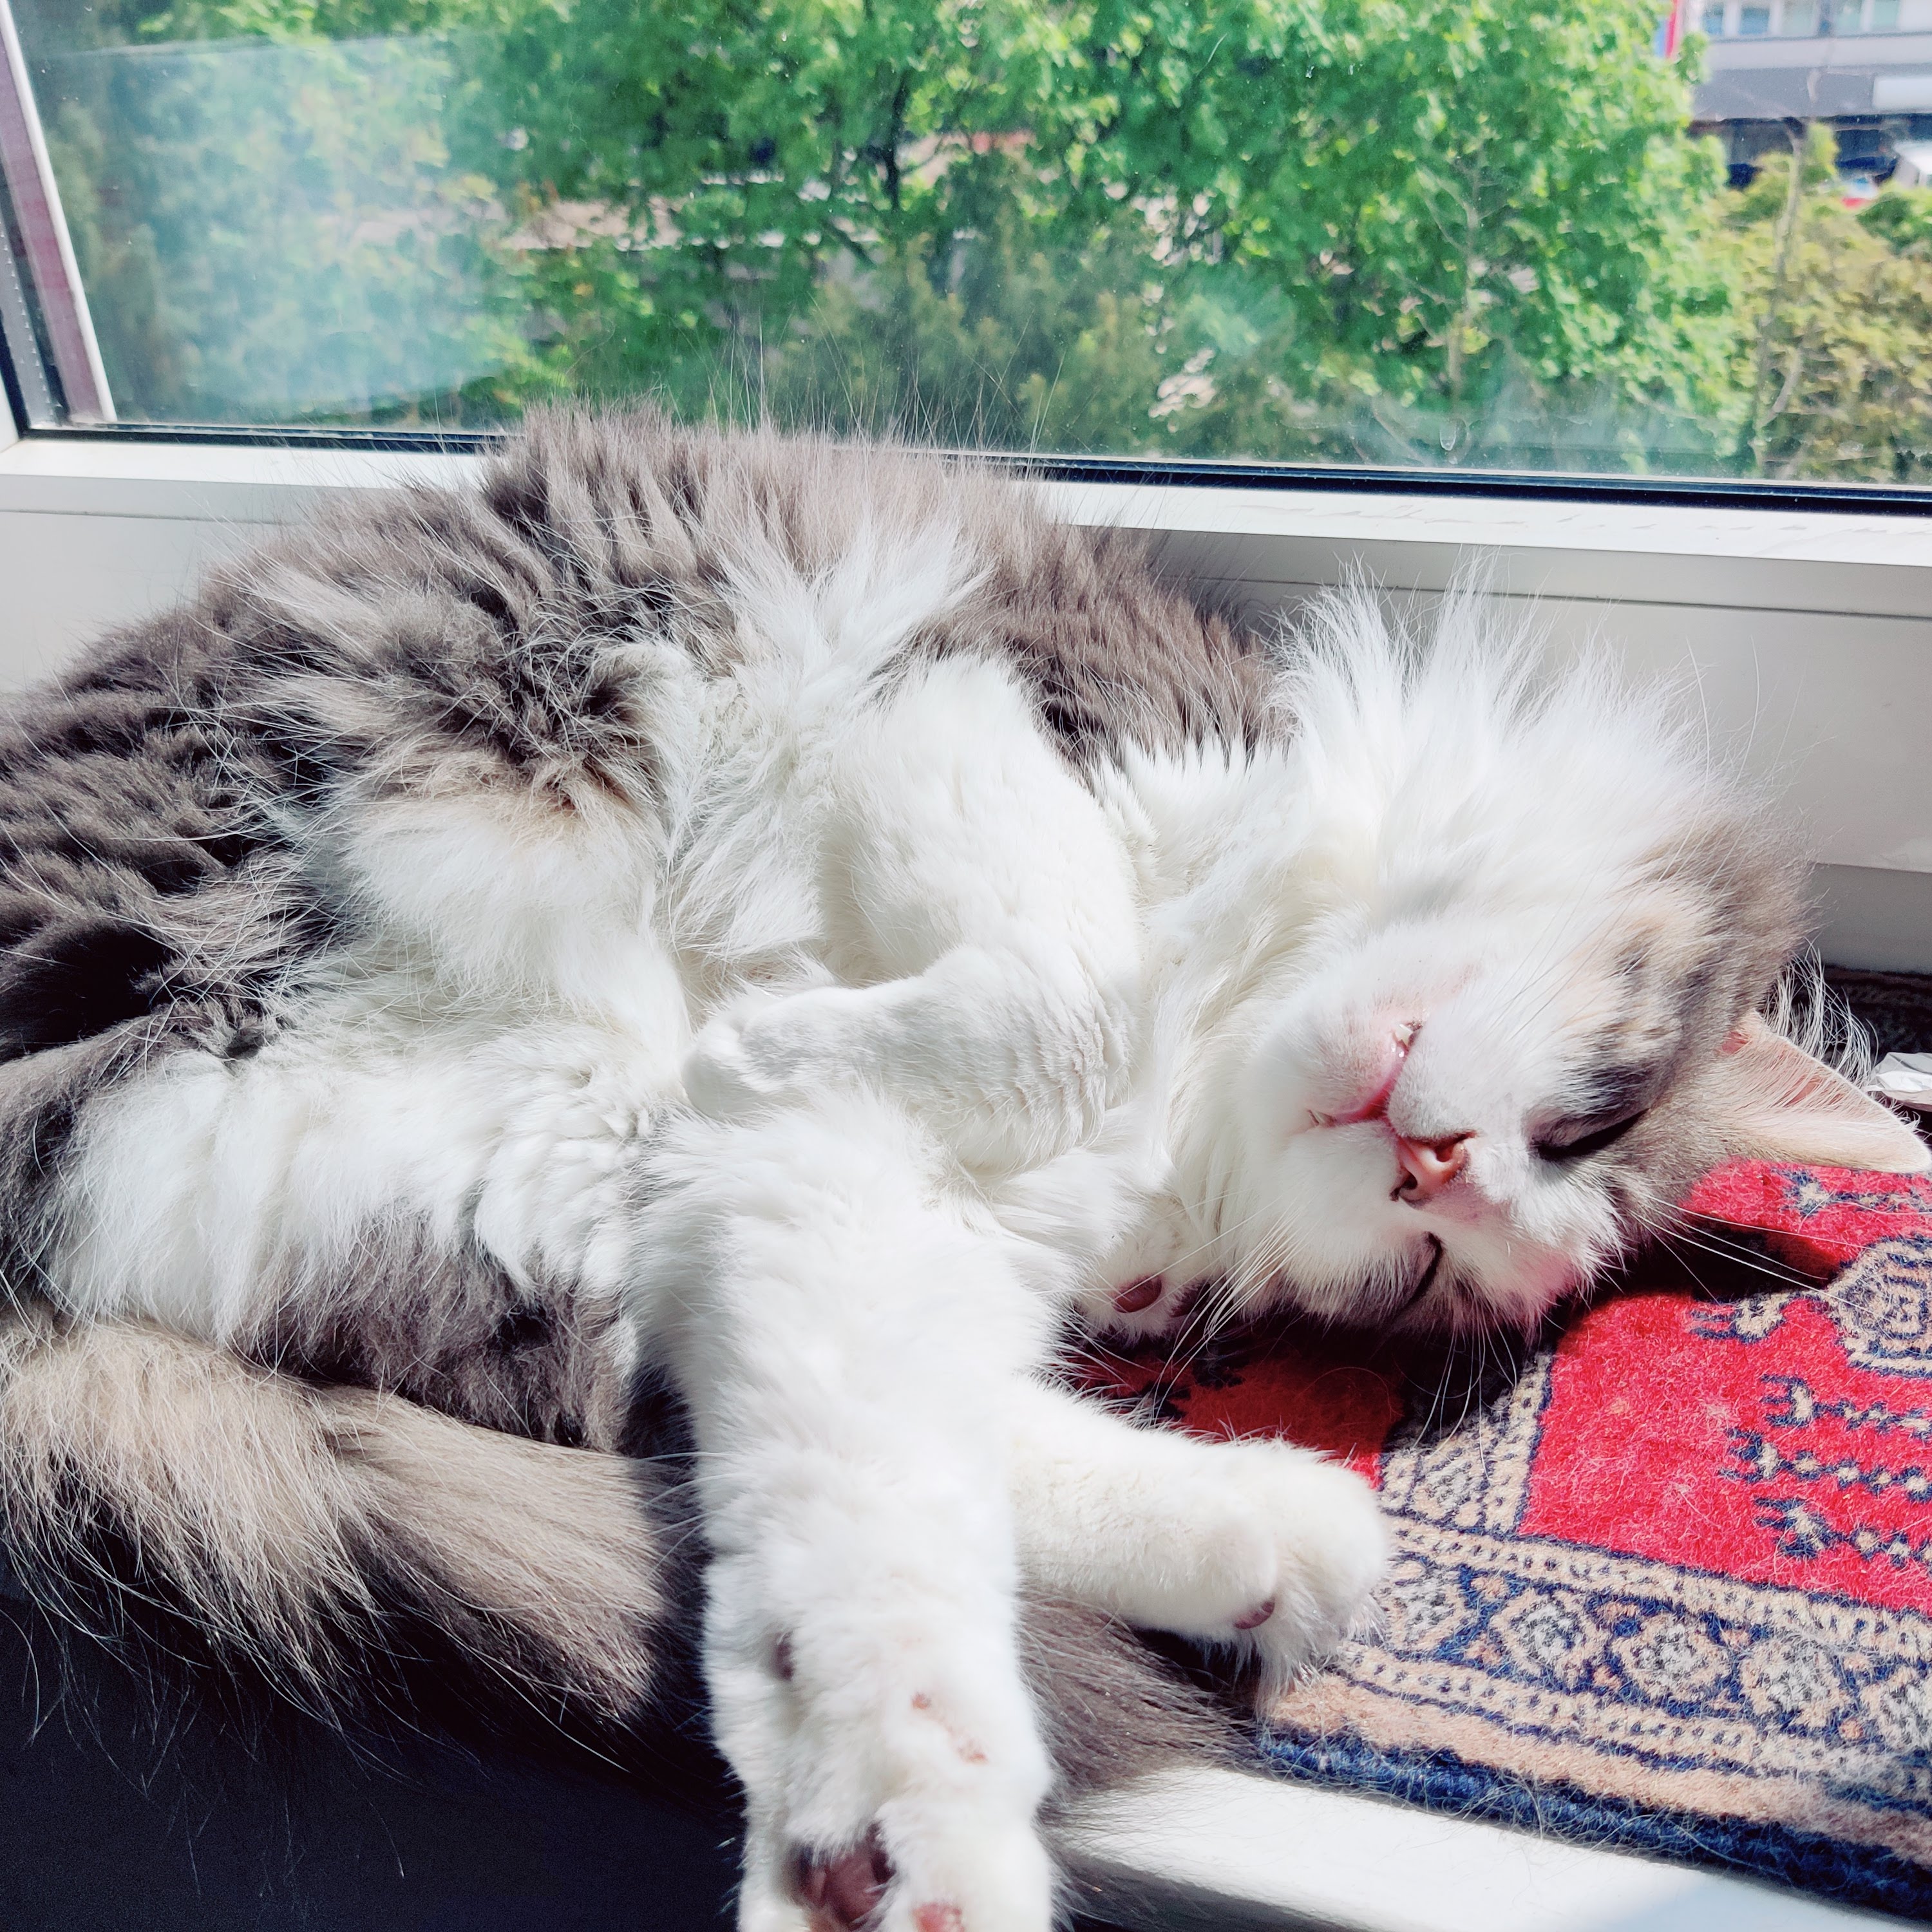 A fluffy gray and white cat sleeps upside down in a sunny windowsill.